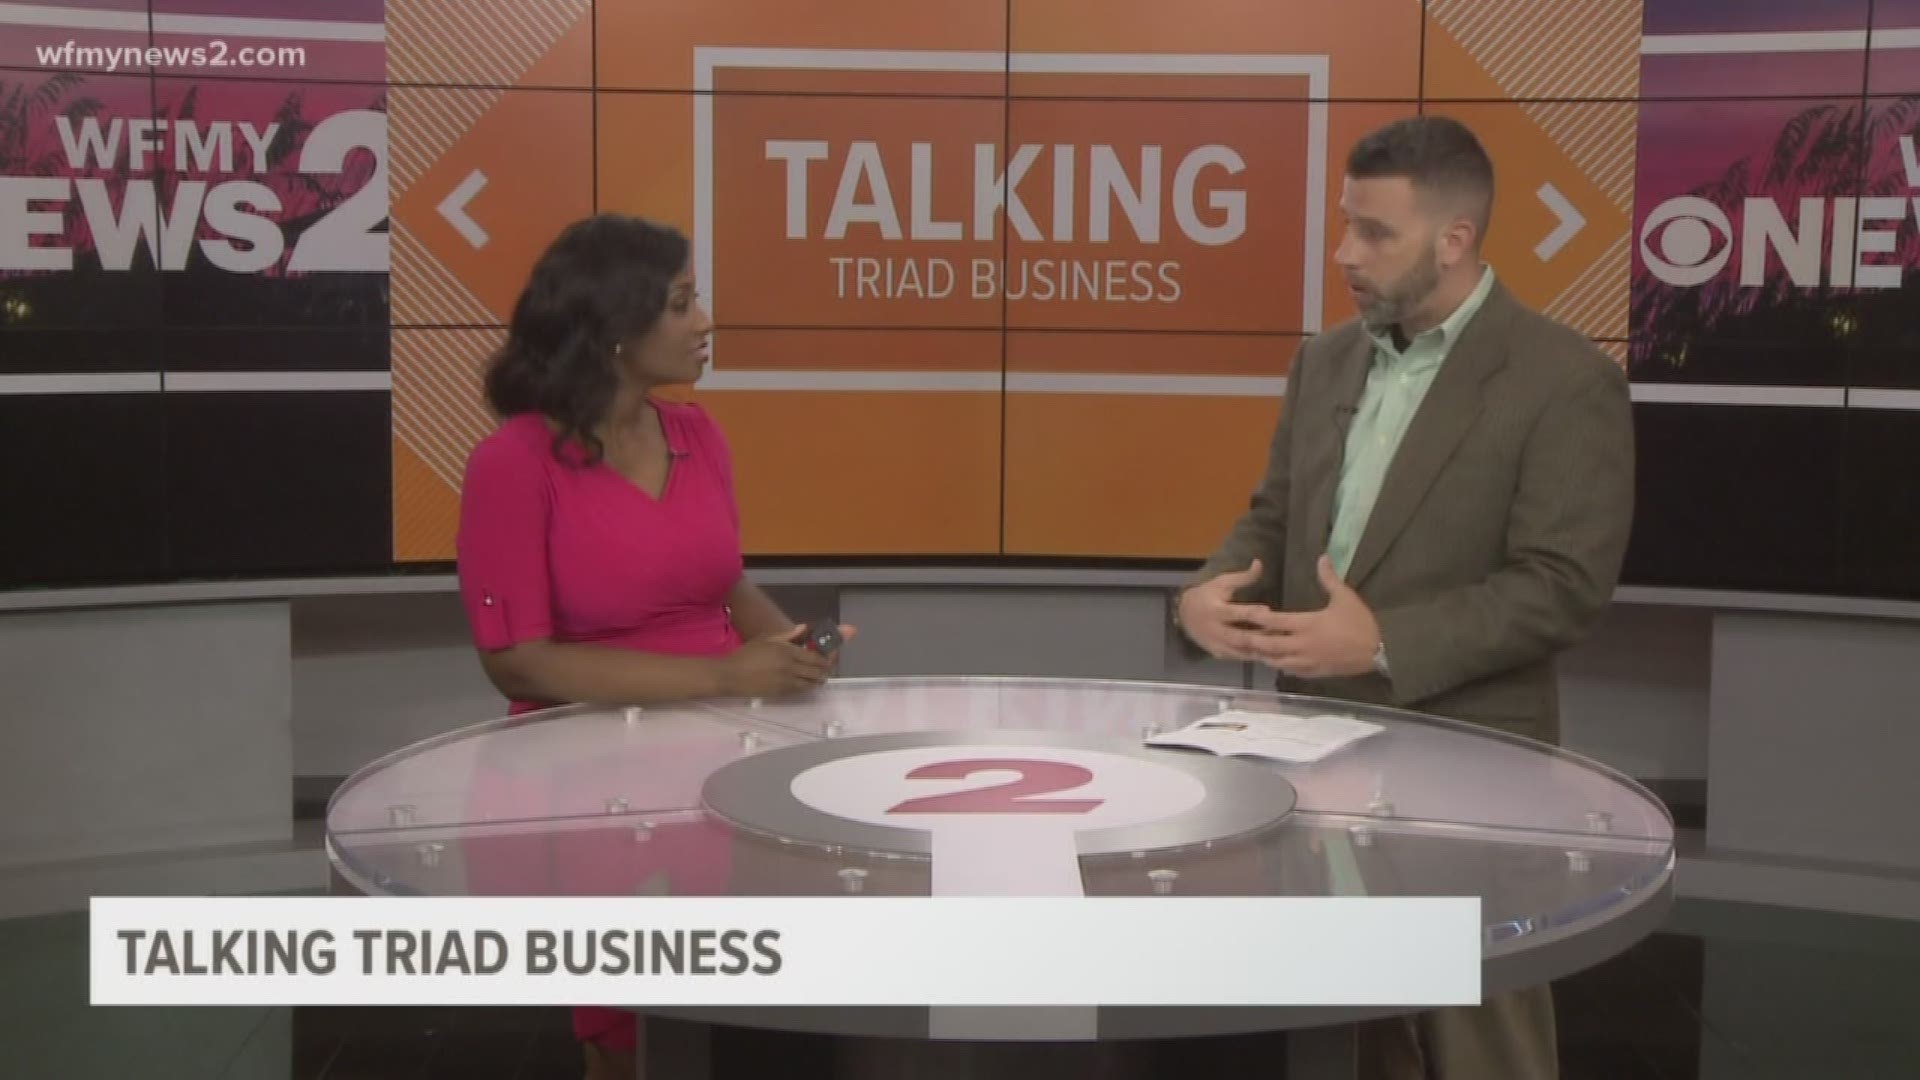 The Triad Business Journal stops by to talk about a plastic surgery center getting a face-lift and the Top Gun star who may own a Triad made jet.